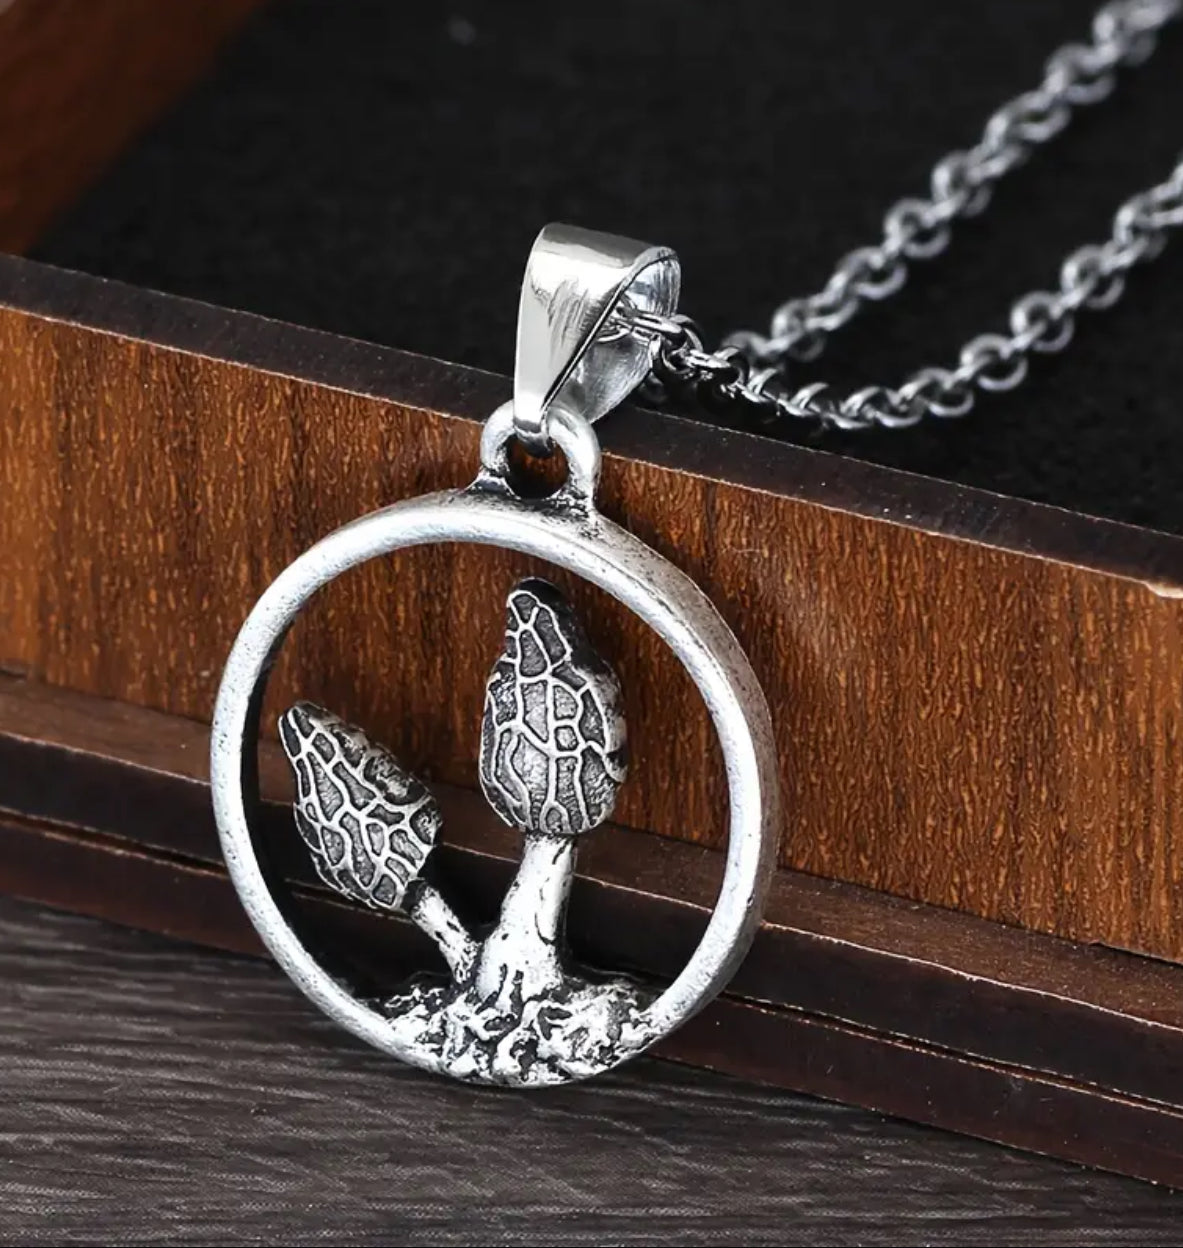 Witchy Mushroom Pendant Necklaces